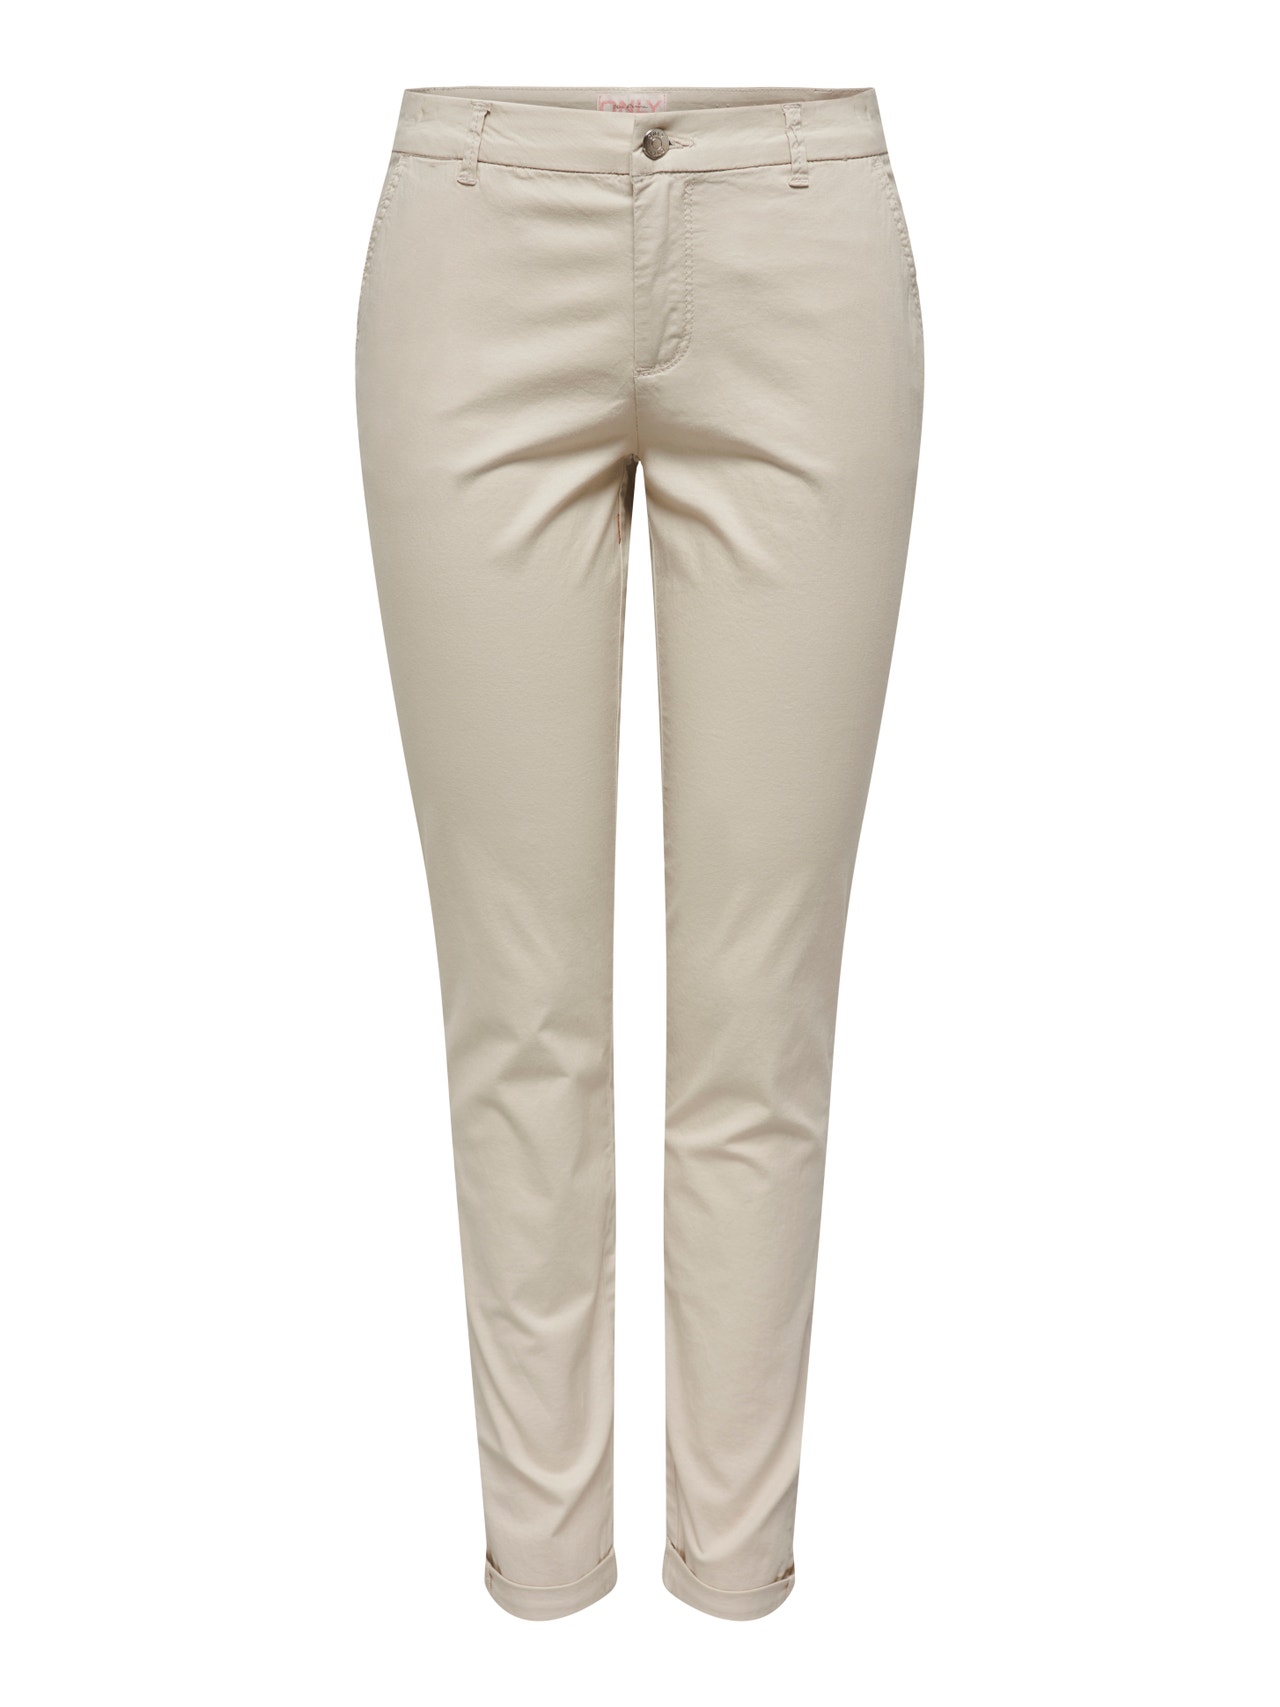 ONLY Classique Chinos -Pumice Stone - 15200641